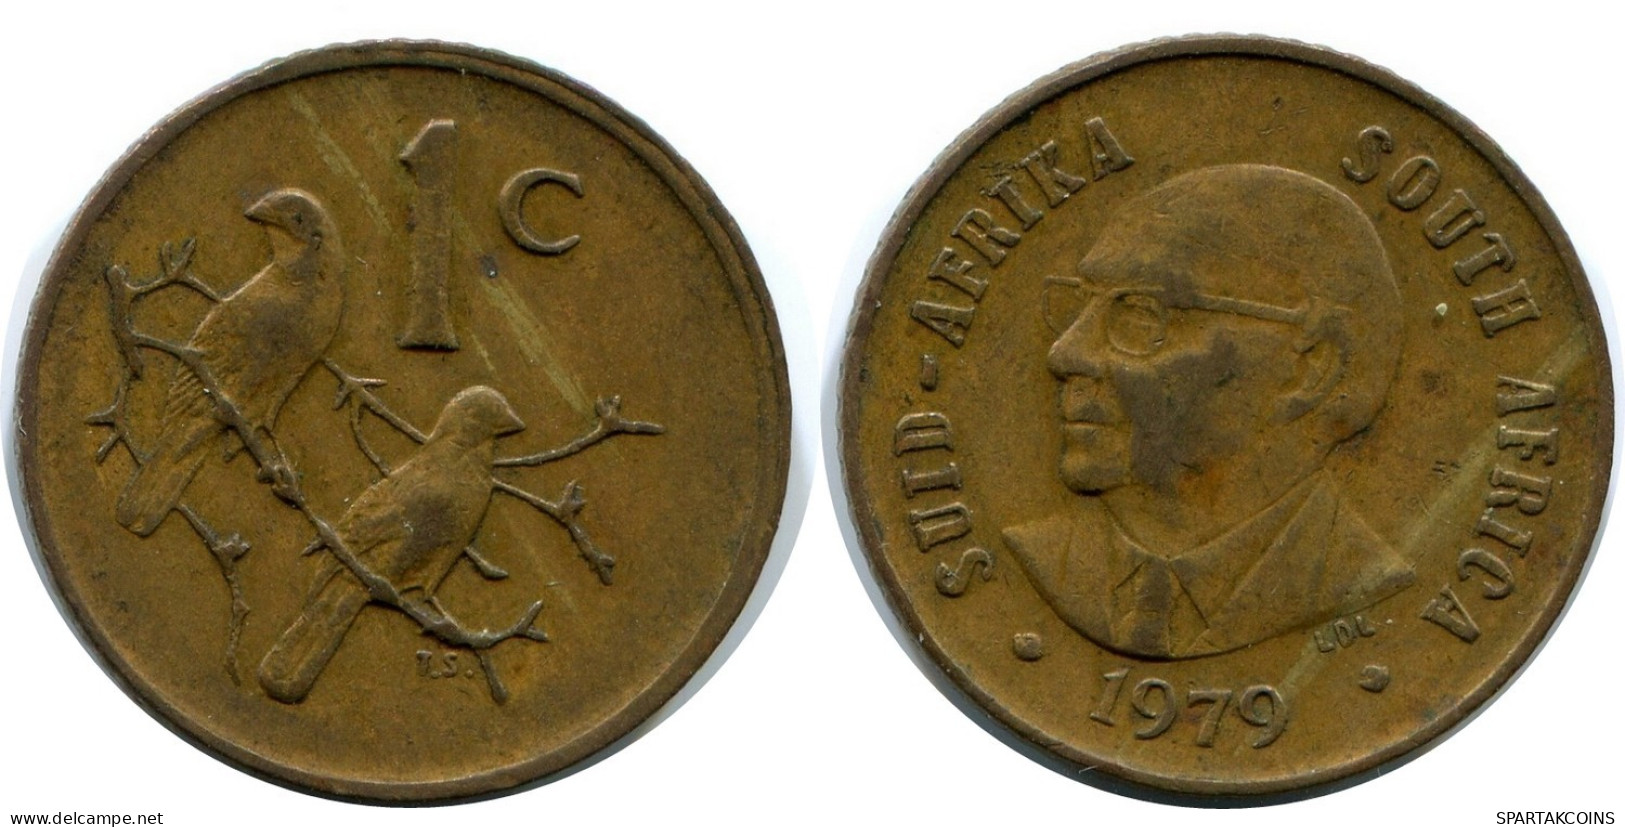 1 CENT 1979 SOUTH AFRICA Coin #AX175.U.A - South Africa